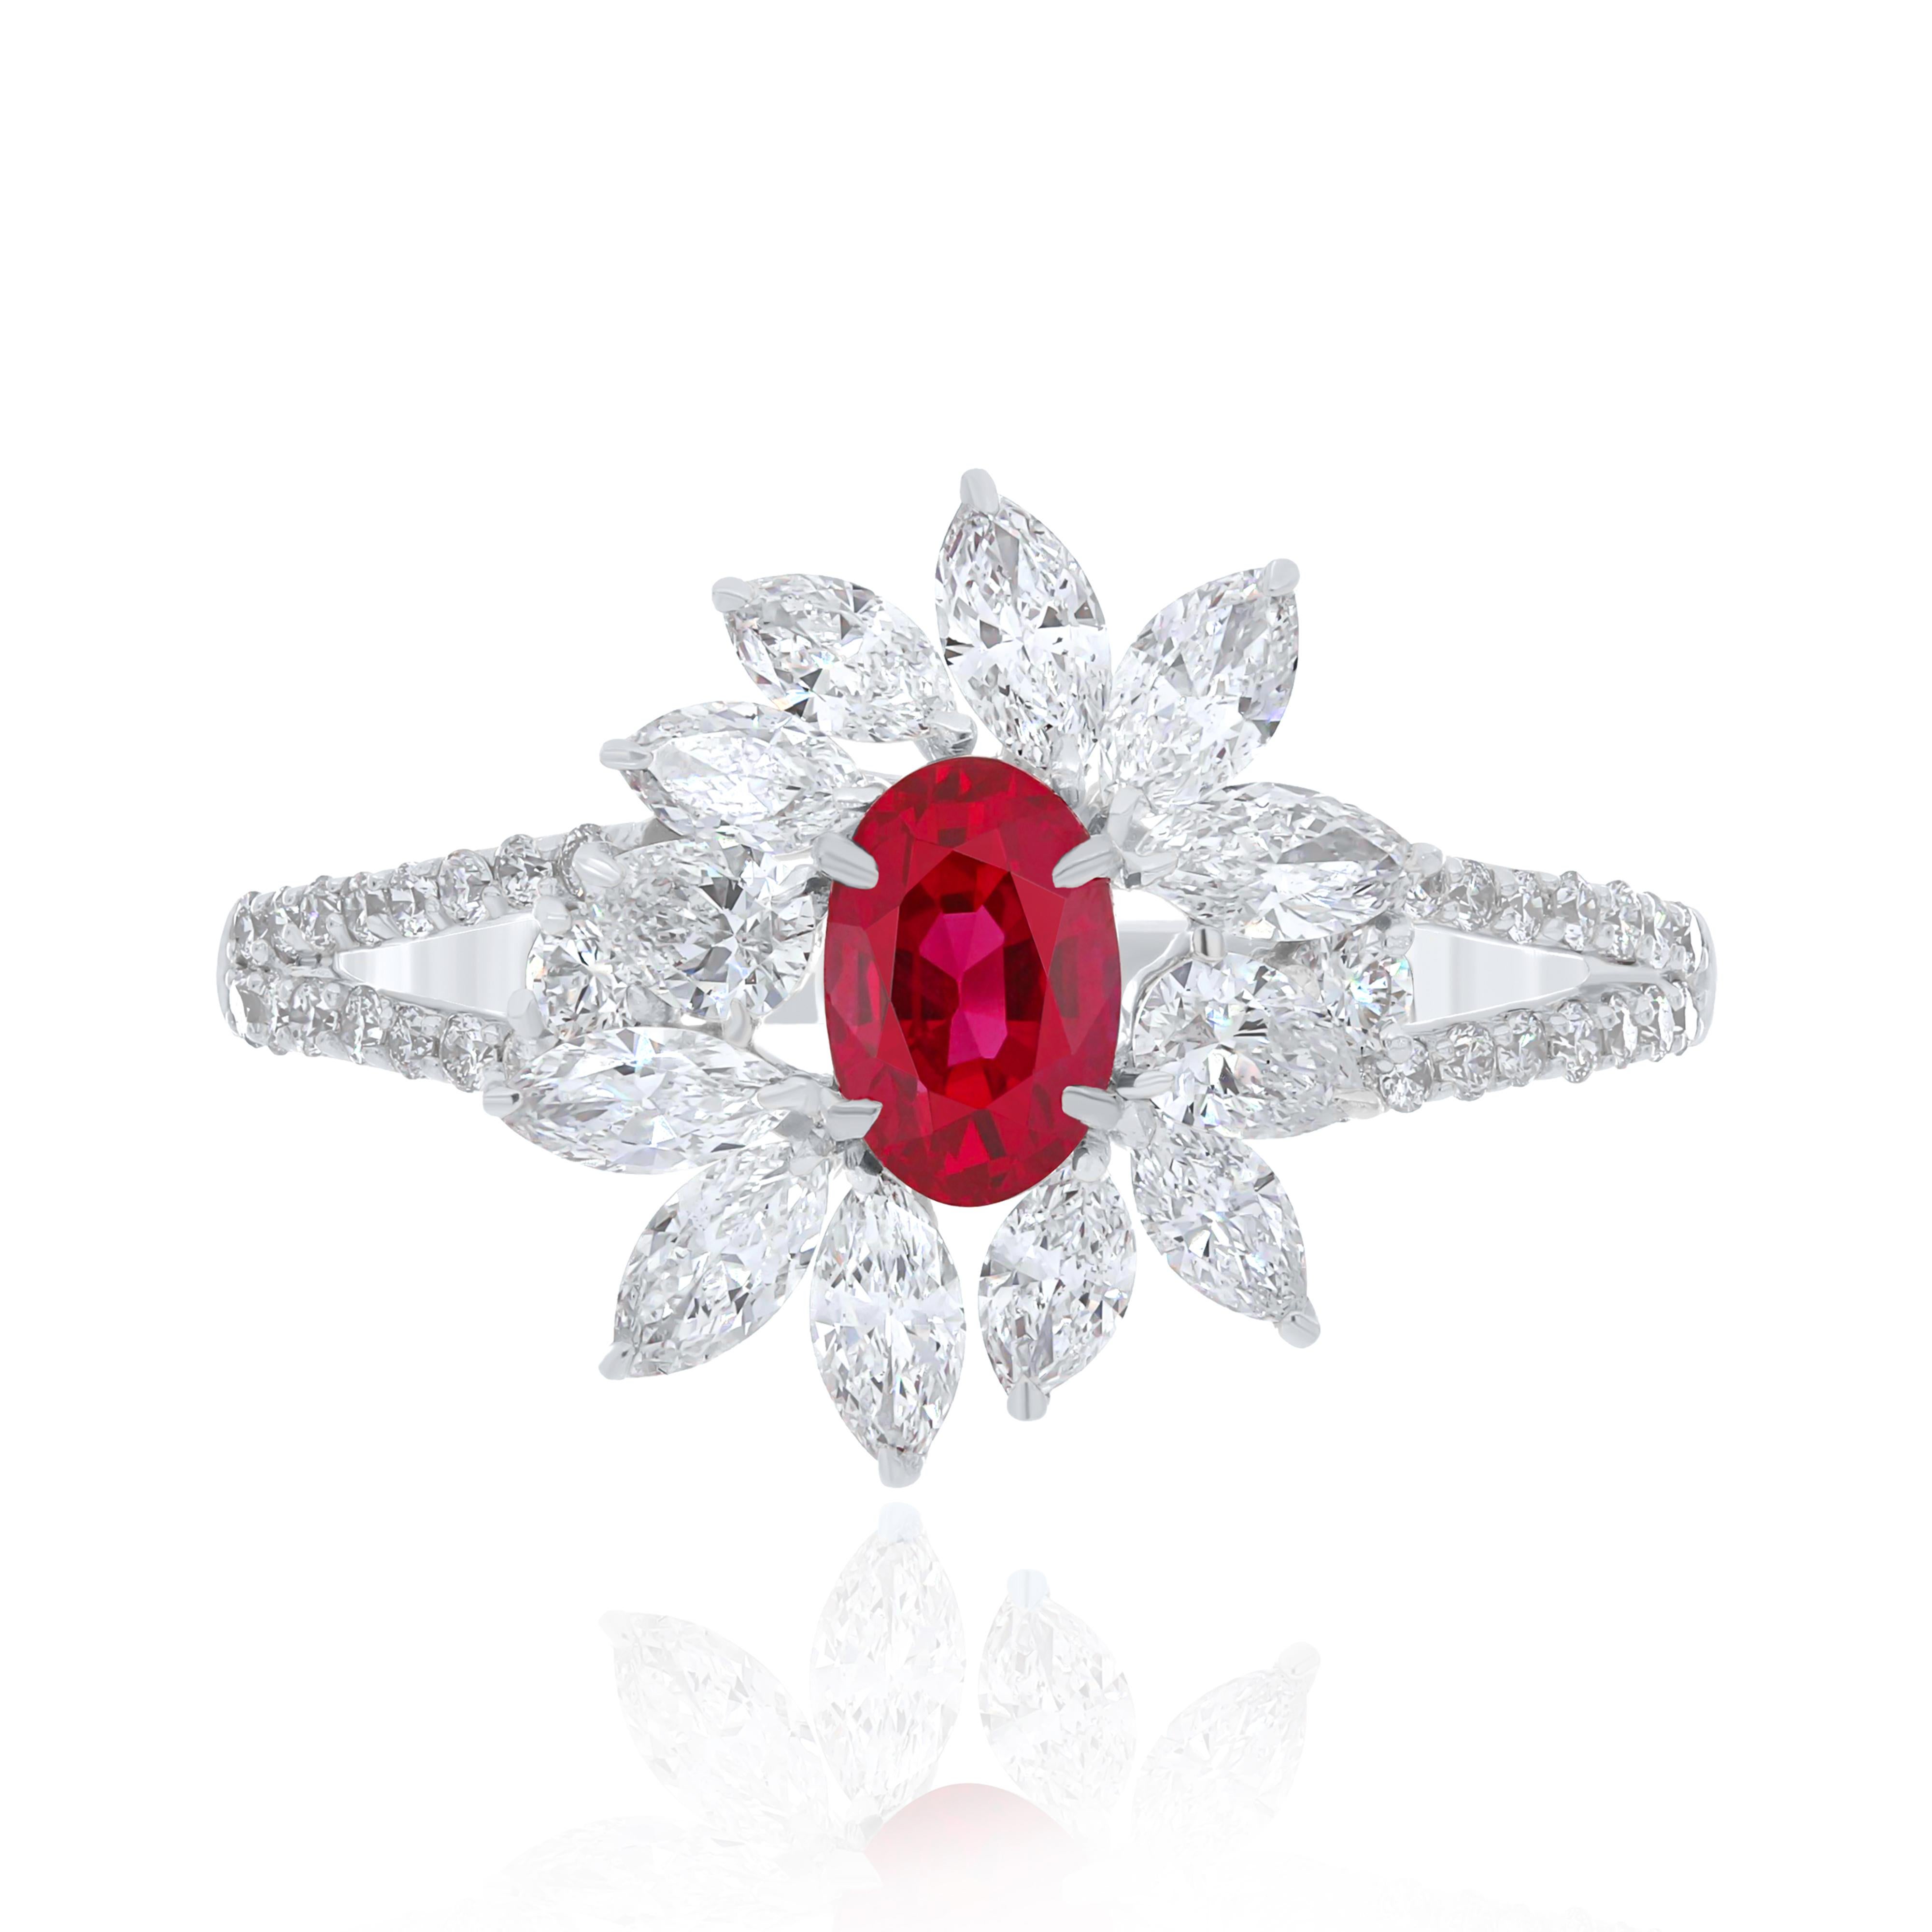 Elegant and exquisitely detailed 18 Karat White Gold Ring, center set with 0.92Cts .Oval Shape Ruby and micro pave set Diamonds, weighing approx. 0.98Cts Beautifully Hand crafted in 18 Karat White Gold.

Stone Detail:
Ruby Burma: 6x4MM

Stone